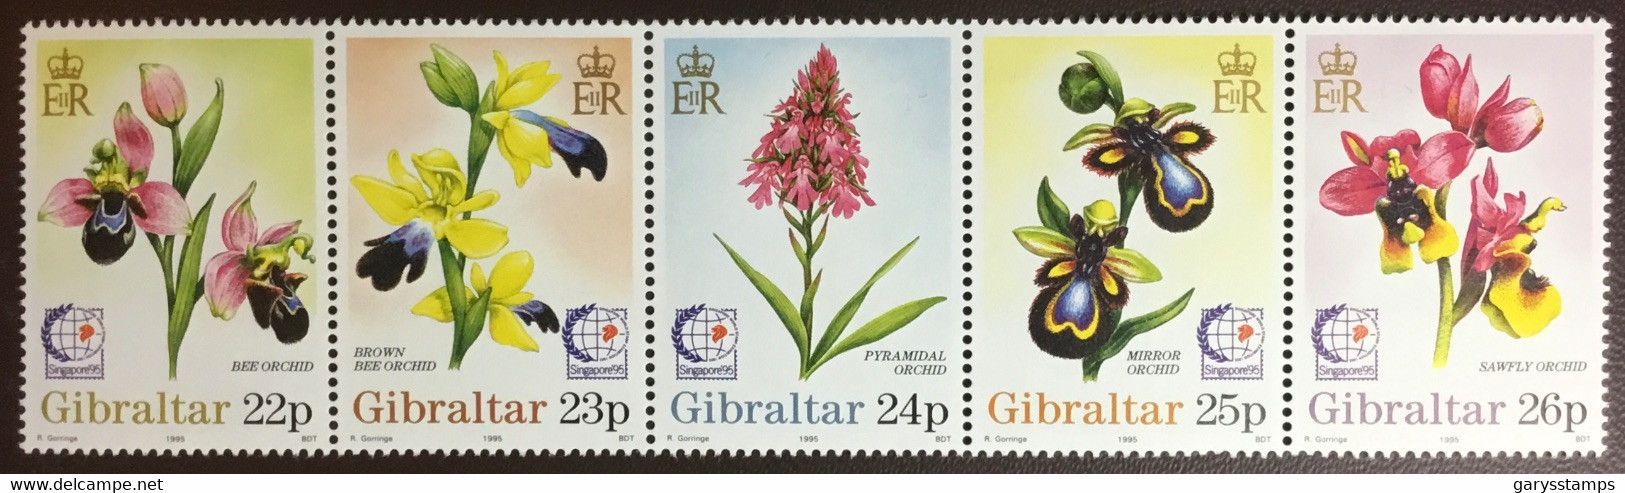 Gibraltar 1995 Singapore Orchids MNH - Orchids